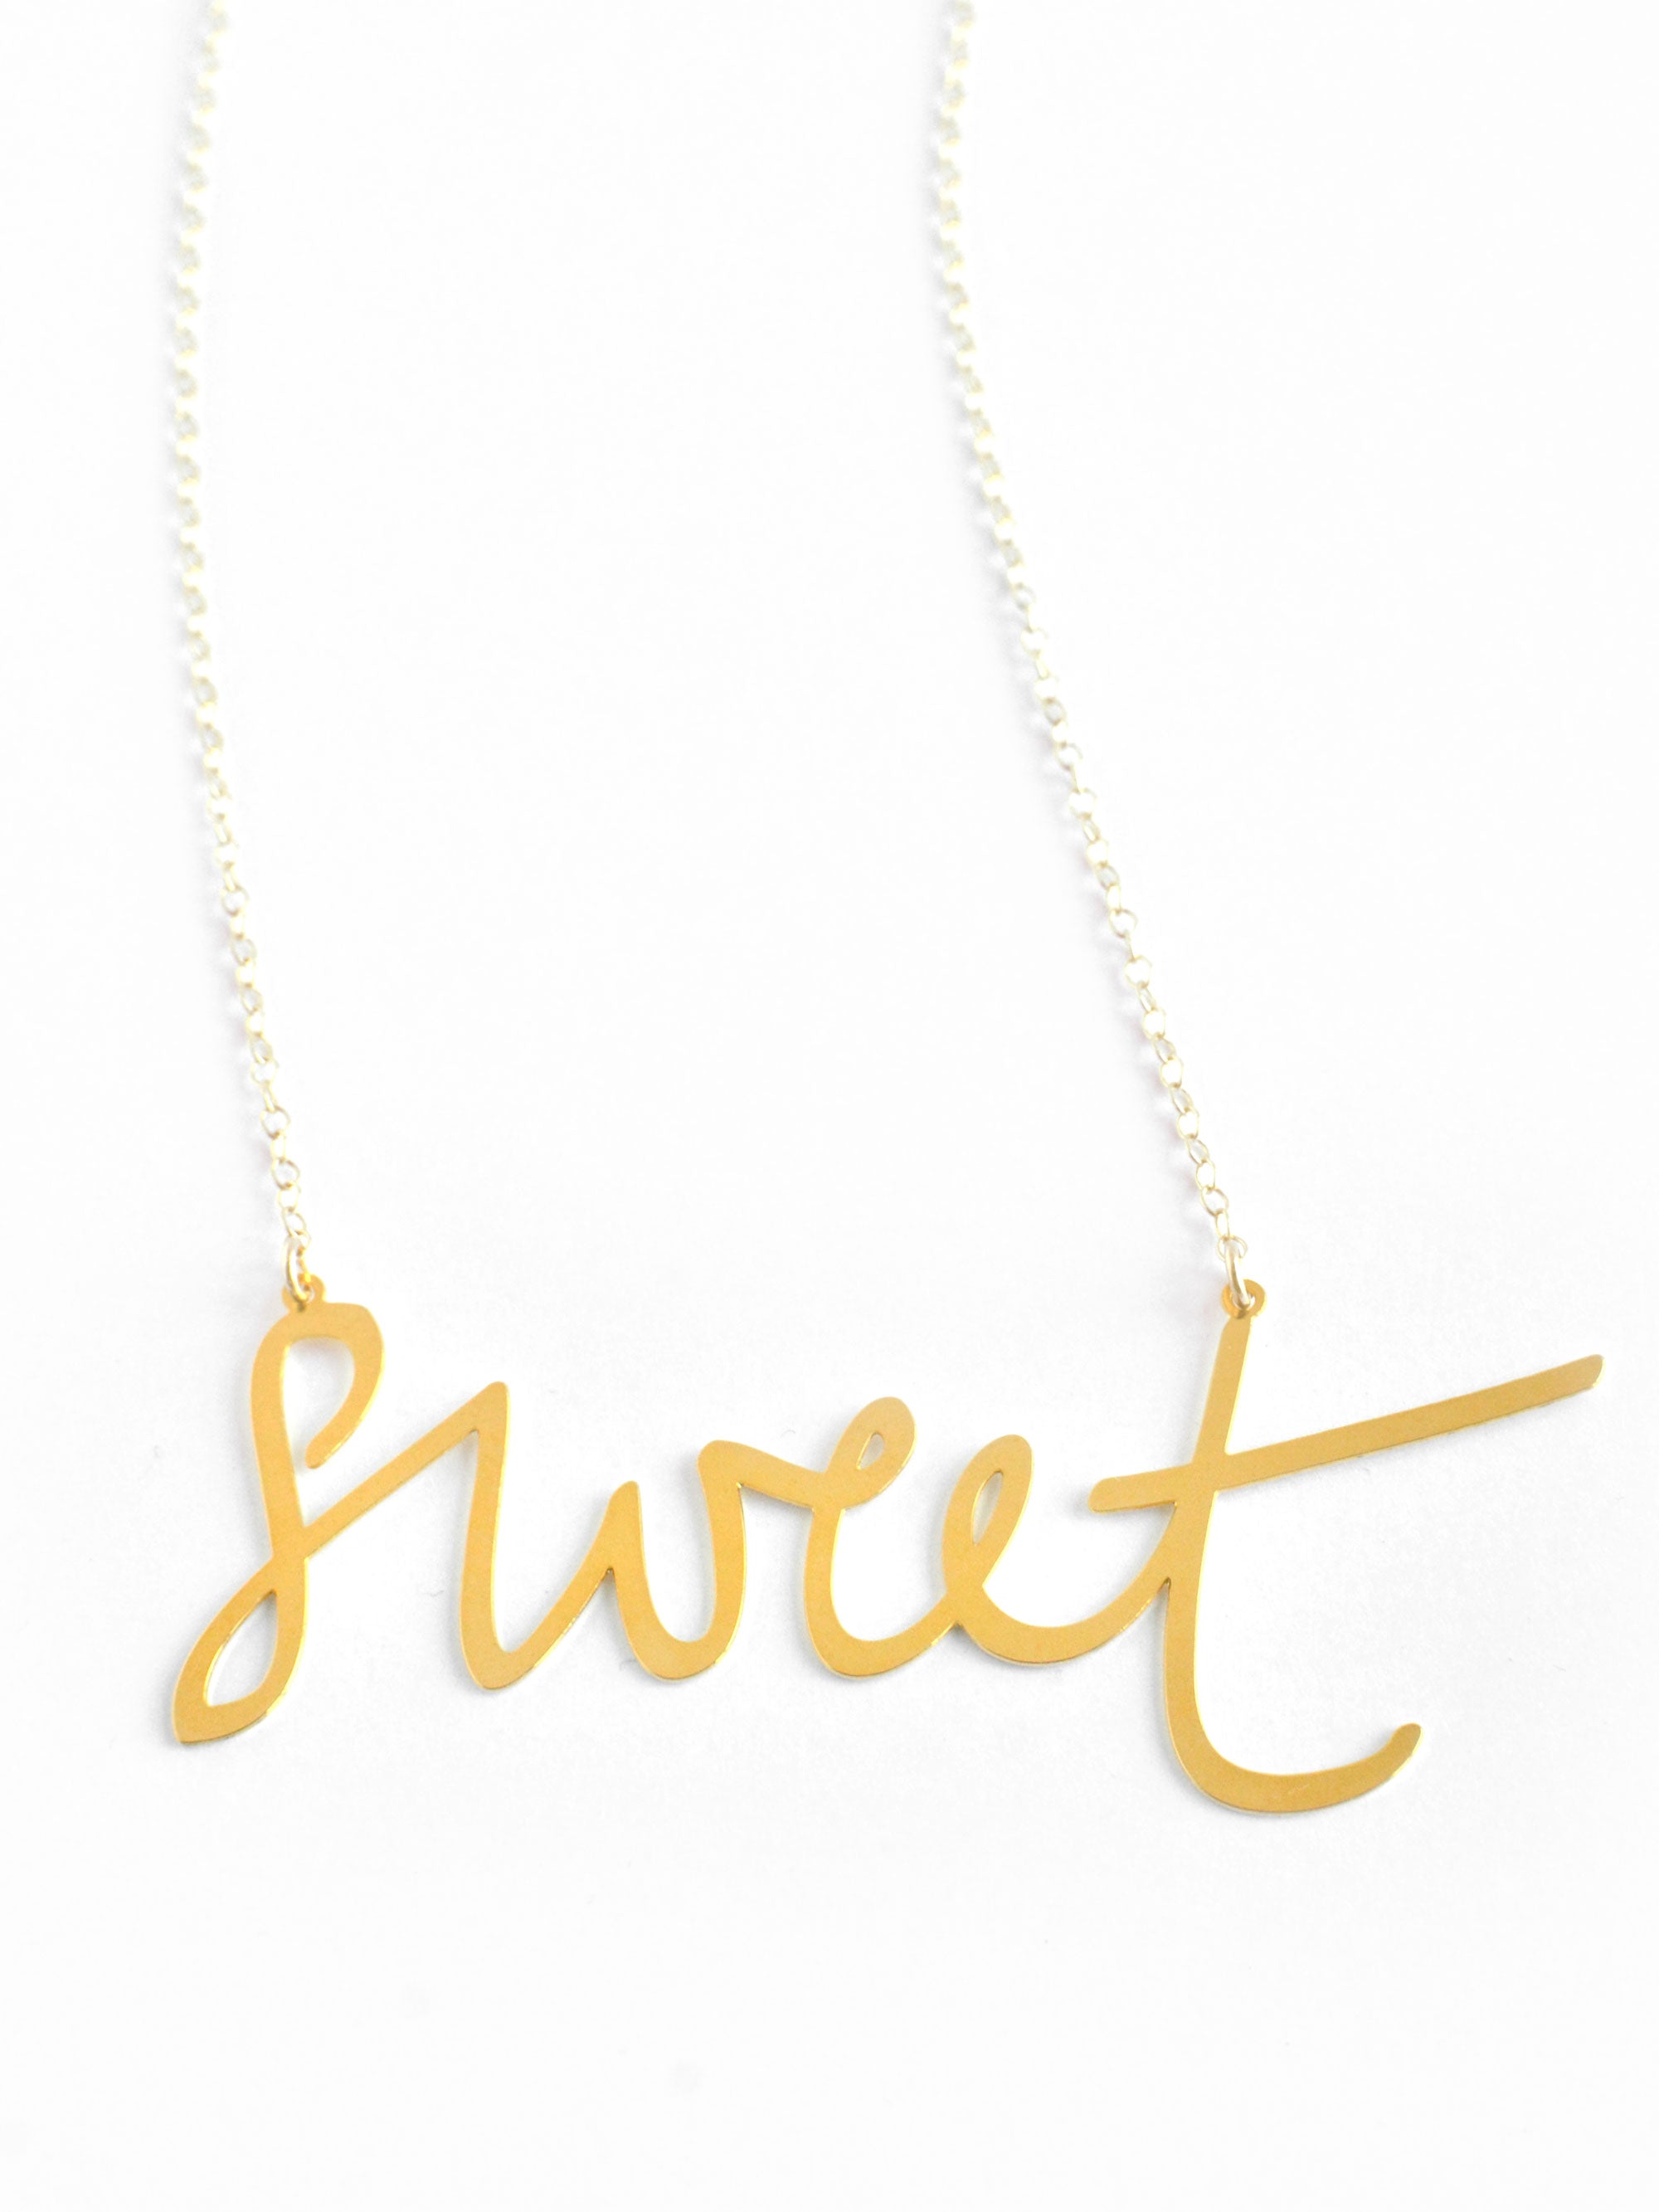 Sweet Necklace - High Quality, Affordable, Hand Written, Self Love, Mantra Word Necklace - Available in Gold and Silver - Small and Large Sizes - Made in USA - Brevity Jewelry